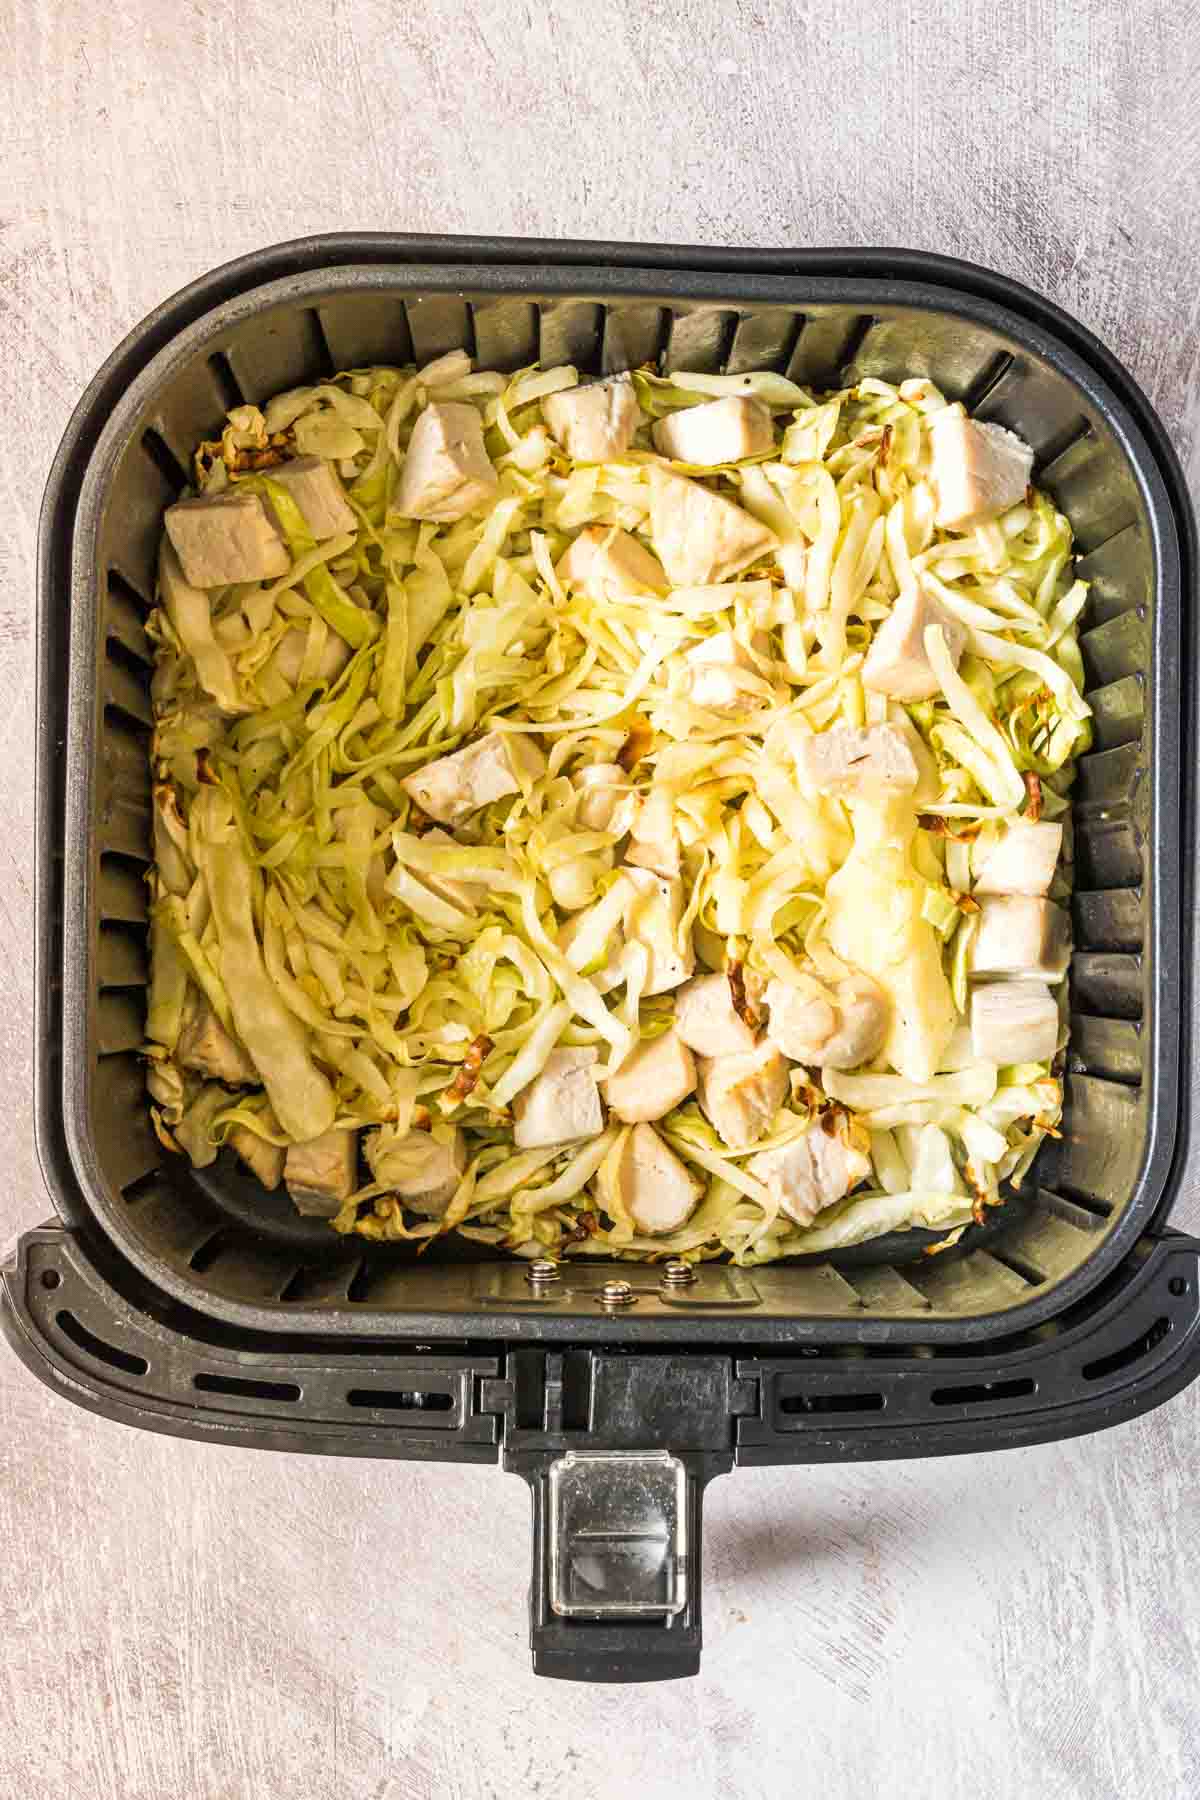 the finished air fryer chicken and cabbage recipe ready to be served